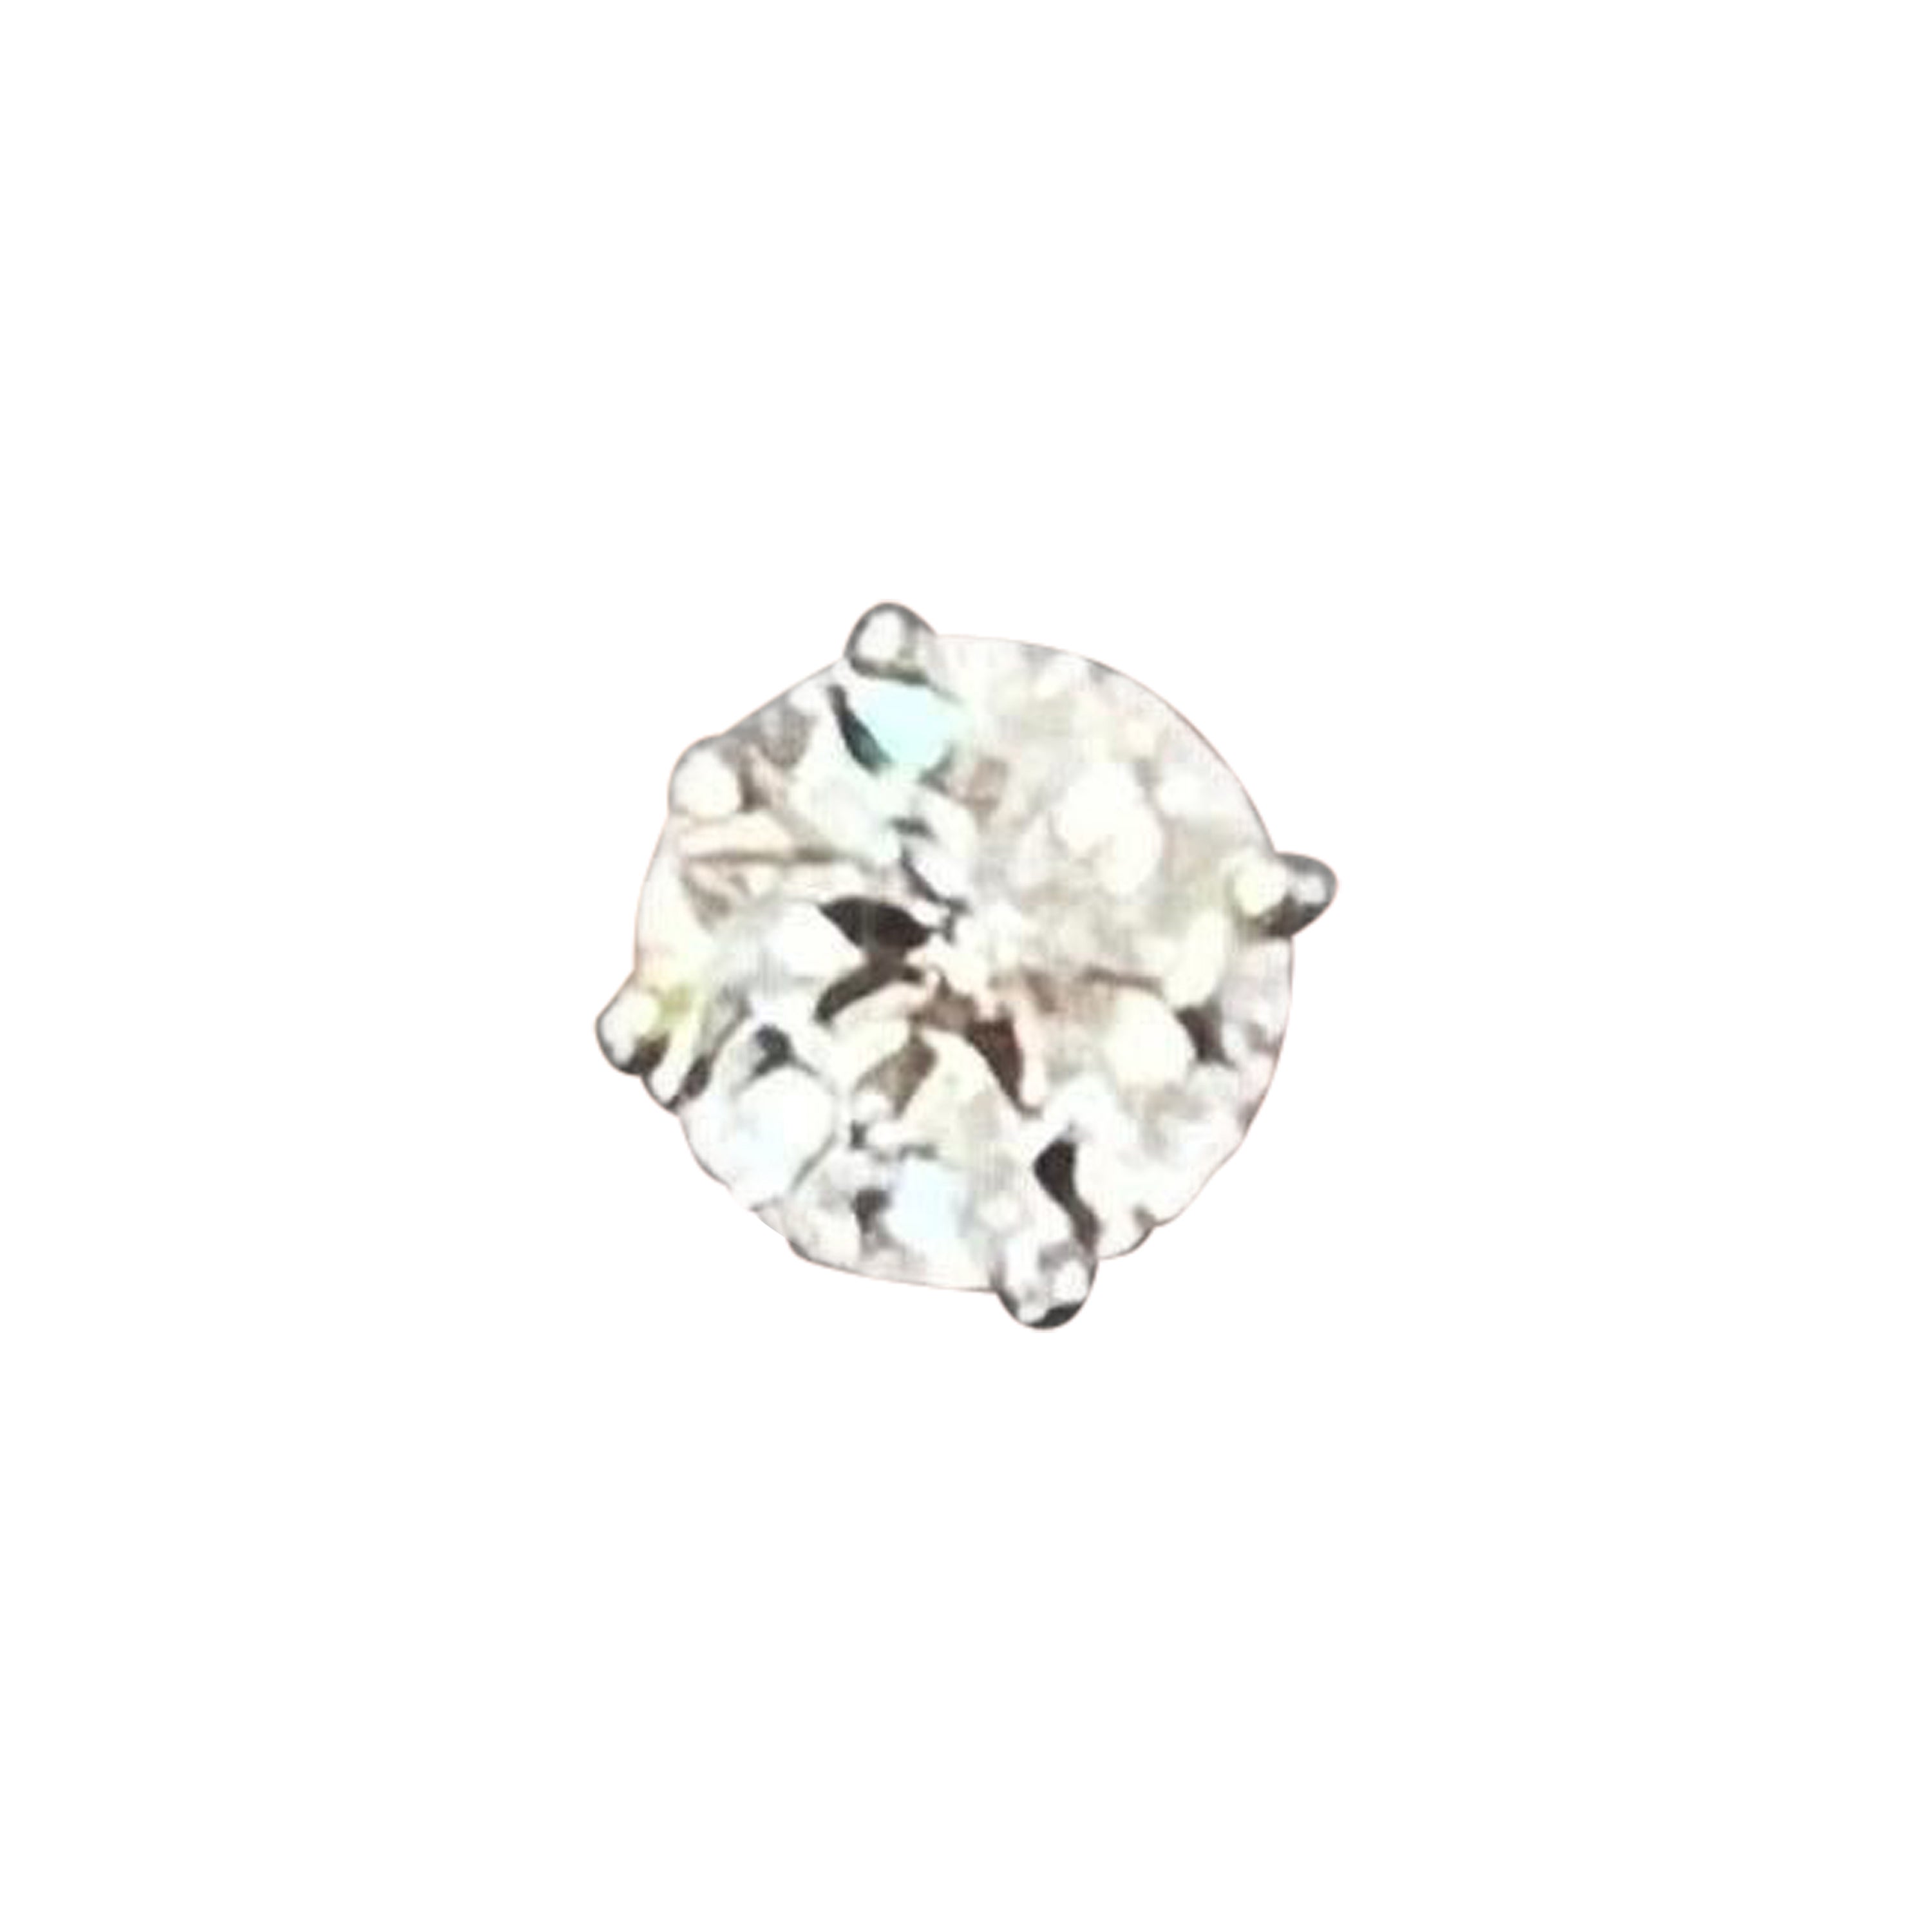 These gorgeous 2.03 ct diamond studs are G/H in color and SI2/I1 in clarity.